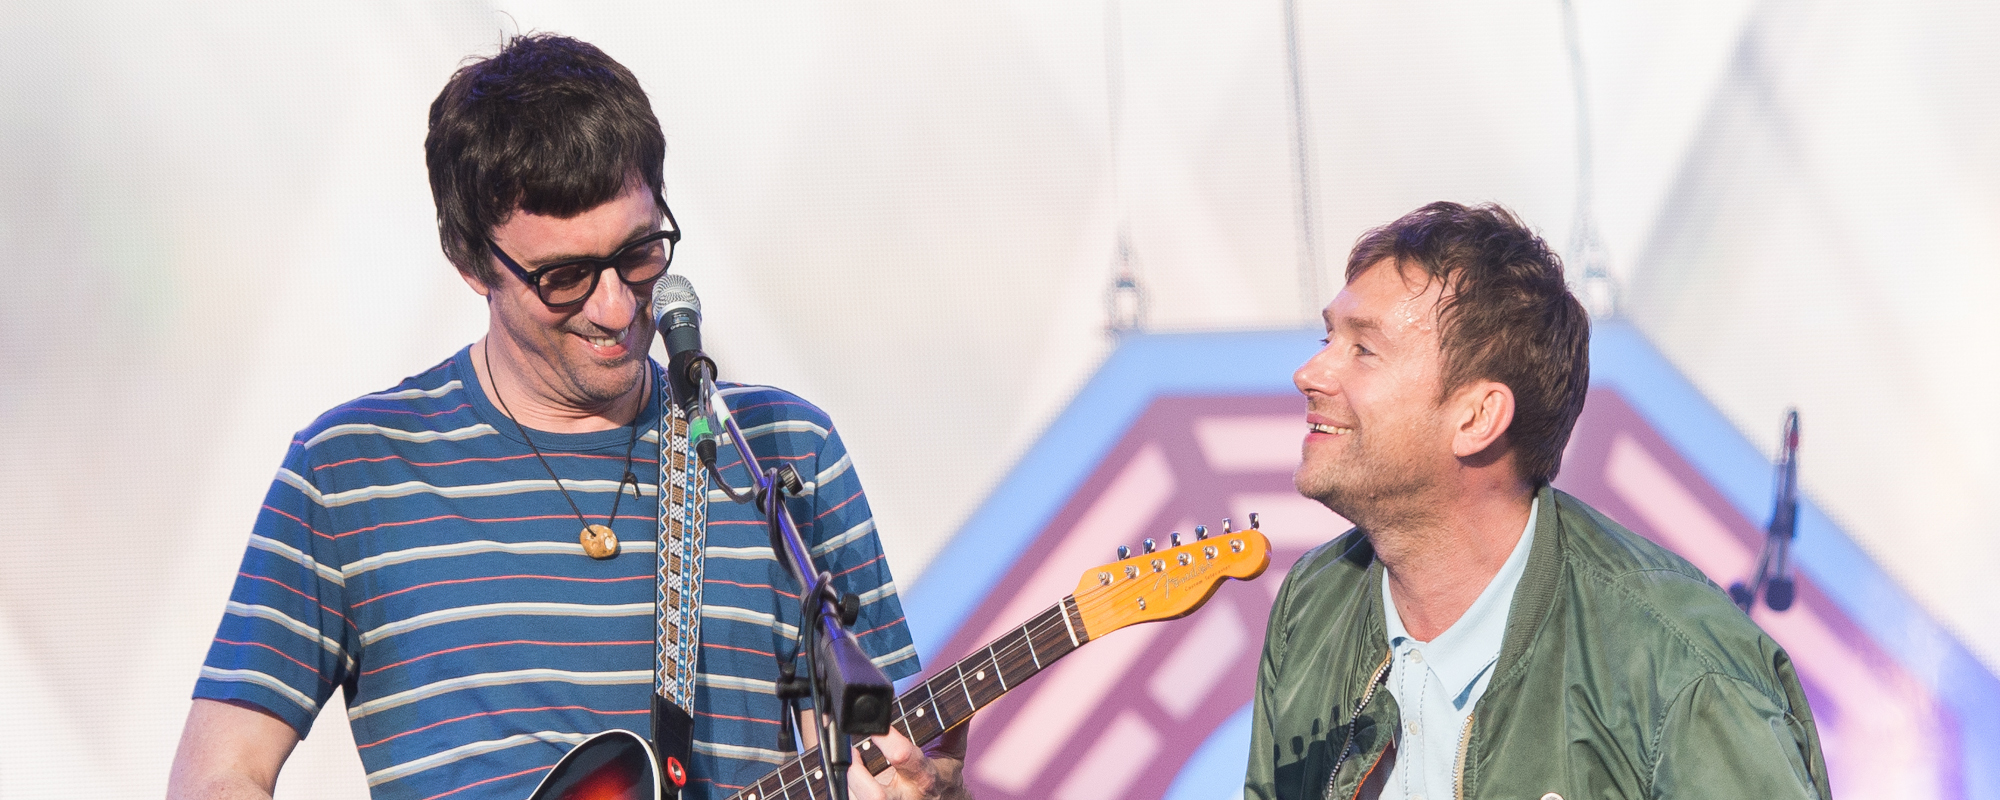 Blur Releases Official Music Video for New Single, ‘St. Charles Square’